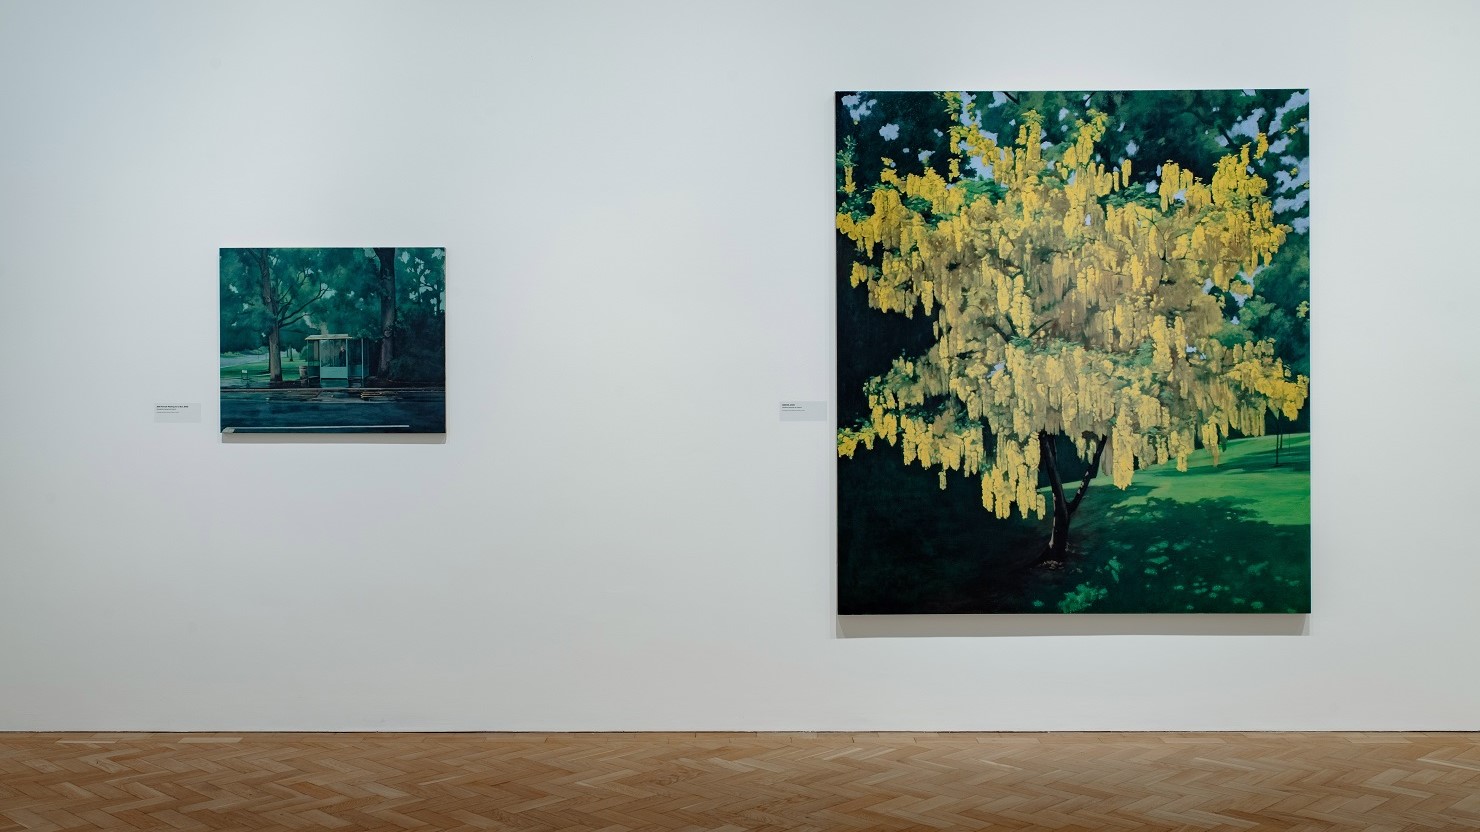 Laburnum tree painting by George Shaw at The Box